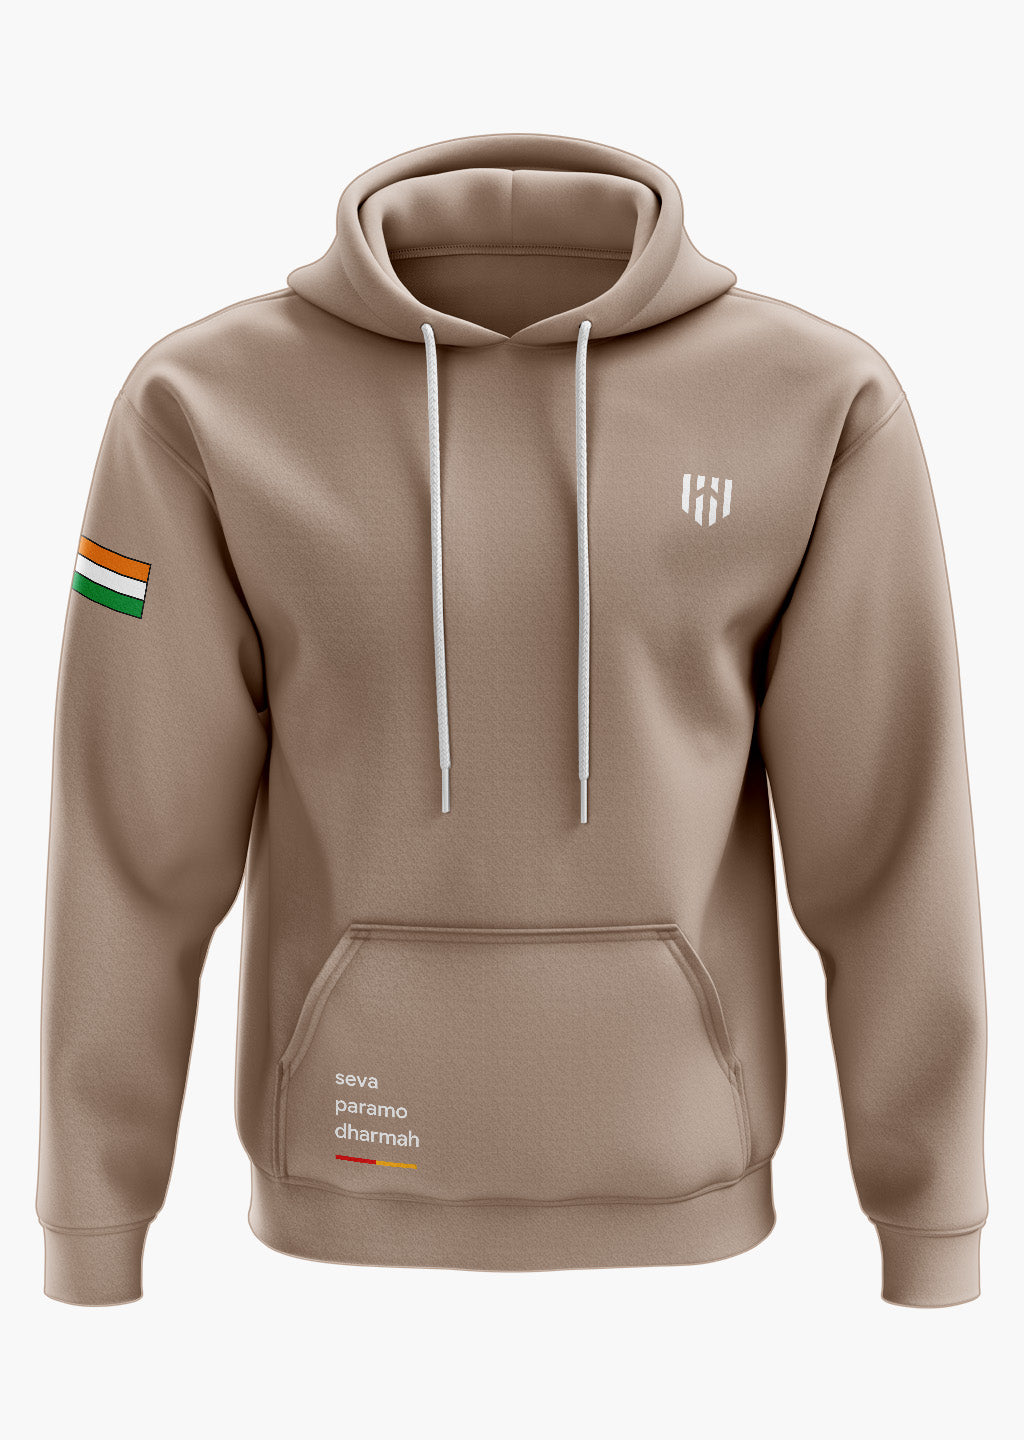 ARMY MOTTO Hoodie